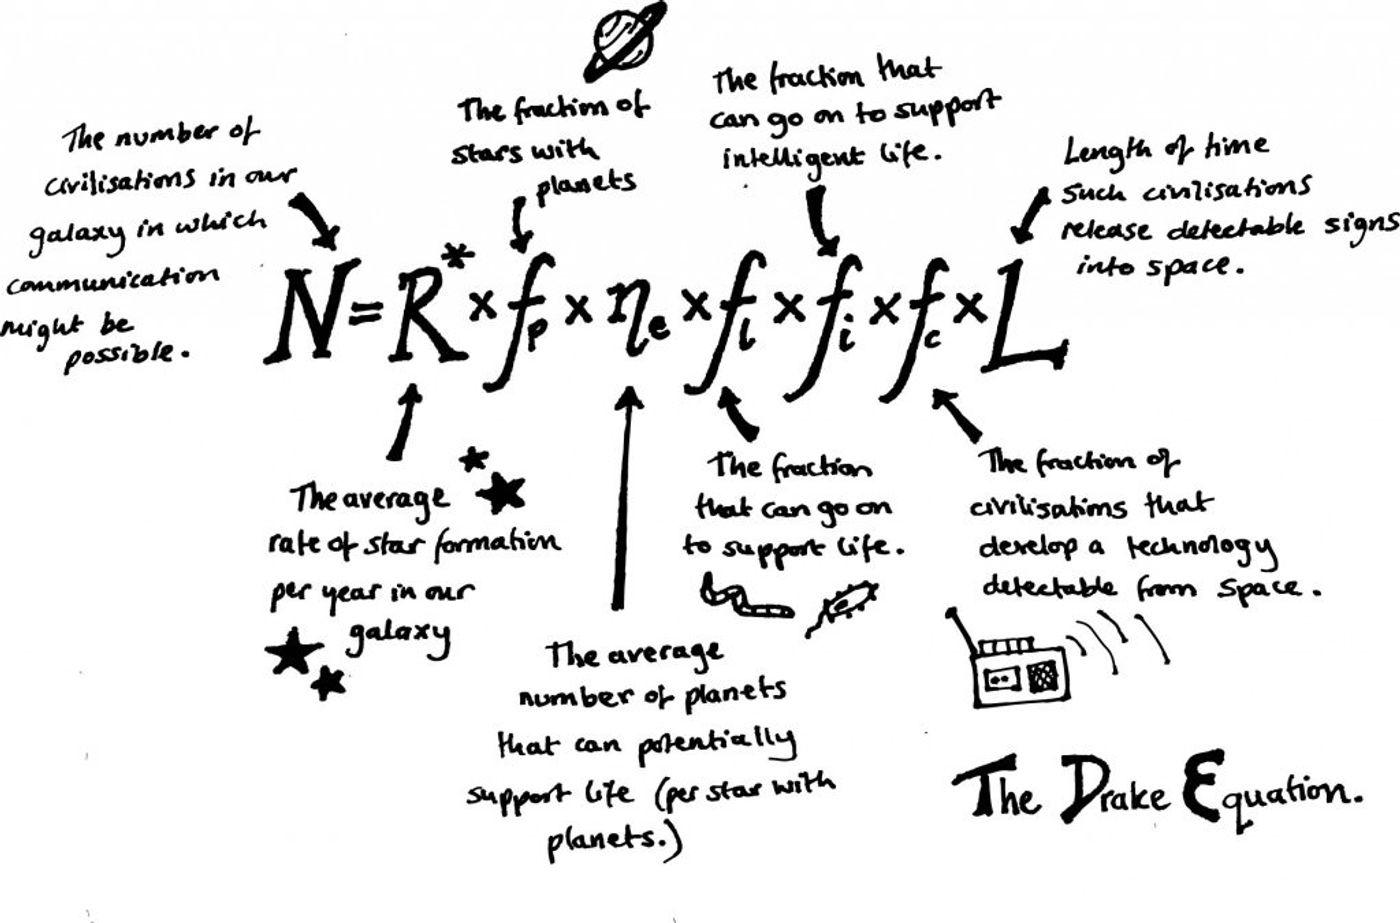 The Drake Equation. Credit: Colin A. Houghton